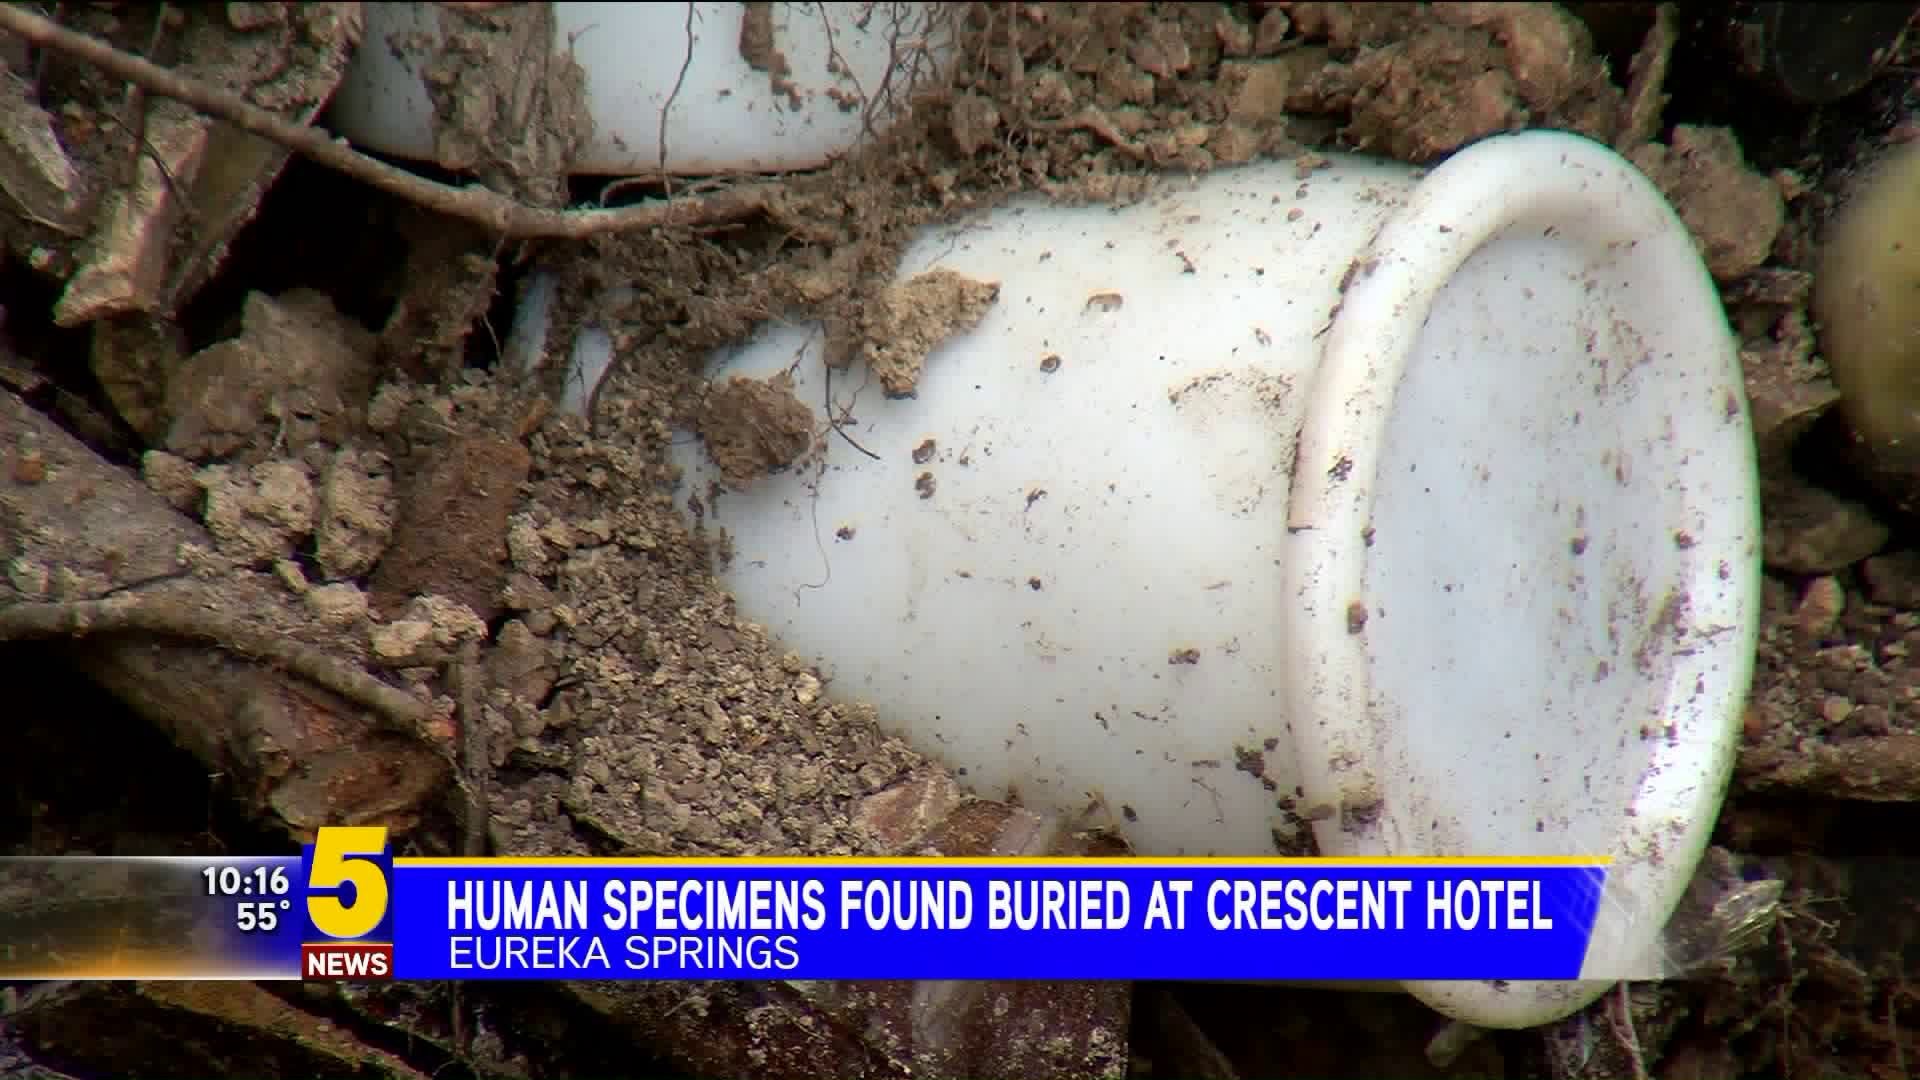 Human Specimens Found Buried at Crescent Hotel